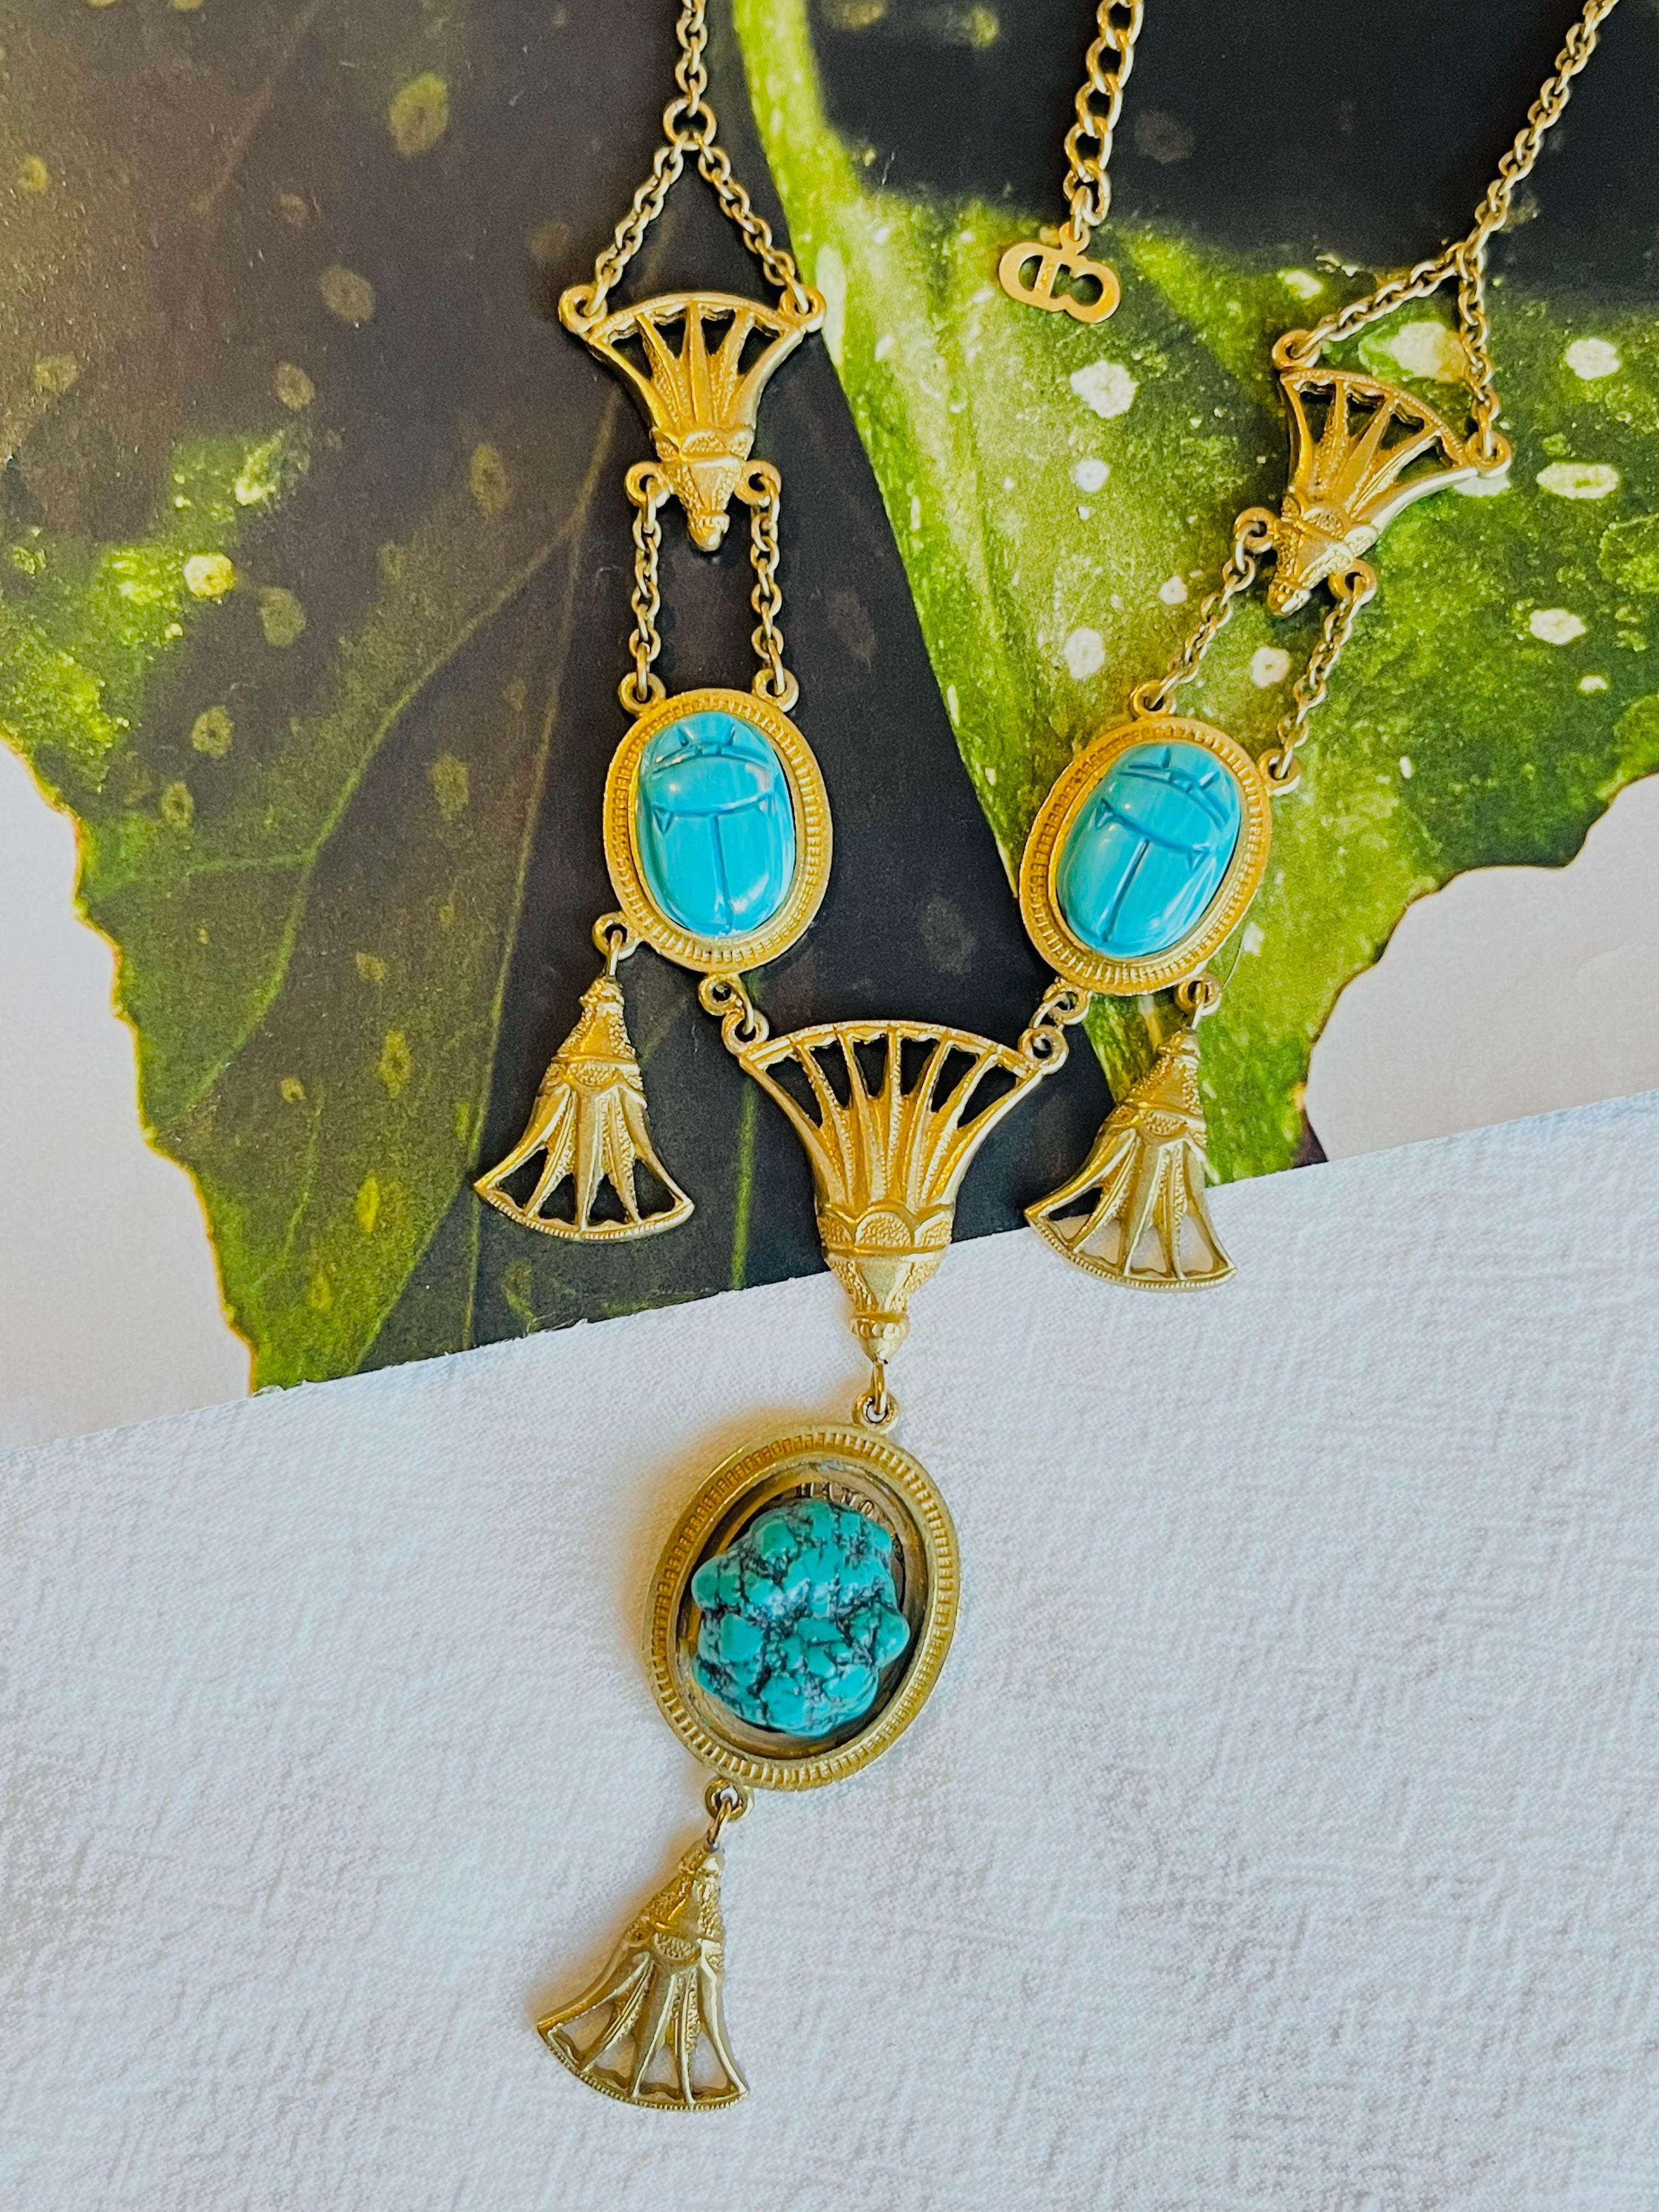 CHRISTIAN DIOR by John Galliano 2004 Egyptian Revival Turquoise Scarab Necklace In Good Condition For Sale In Wokingham, England